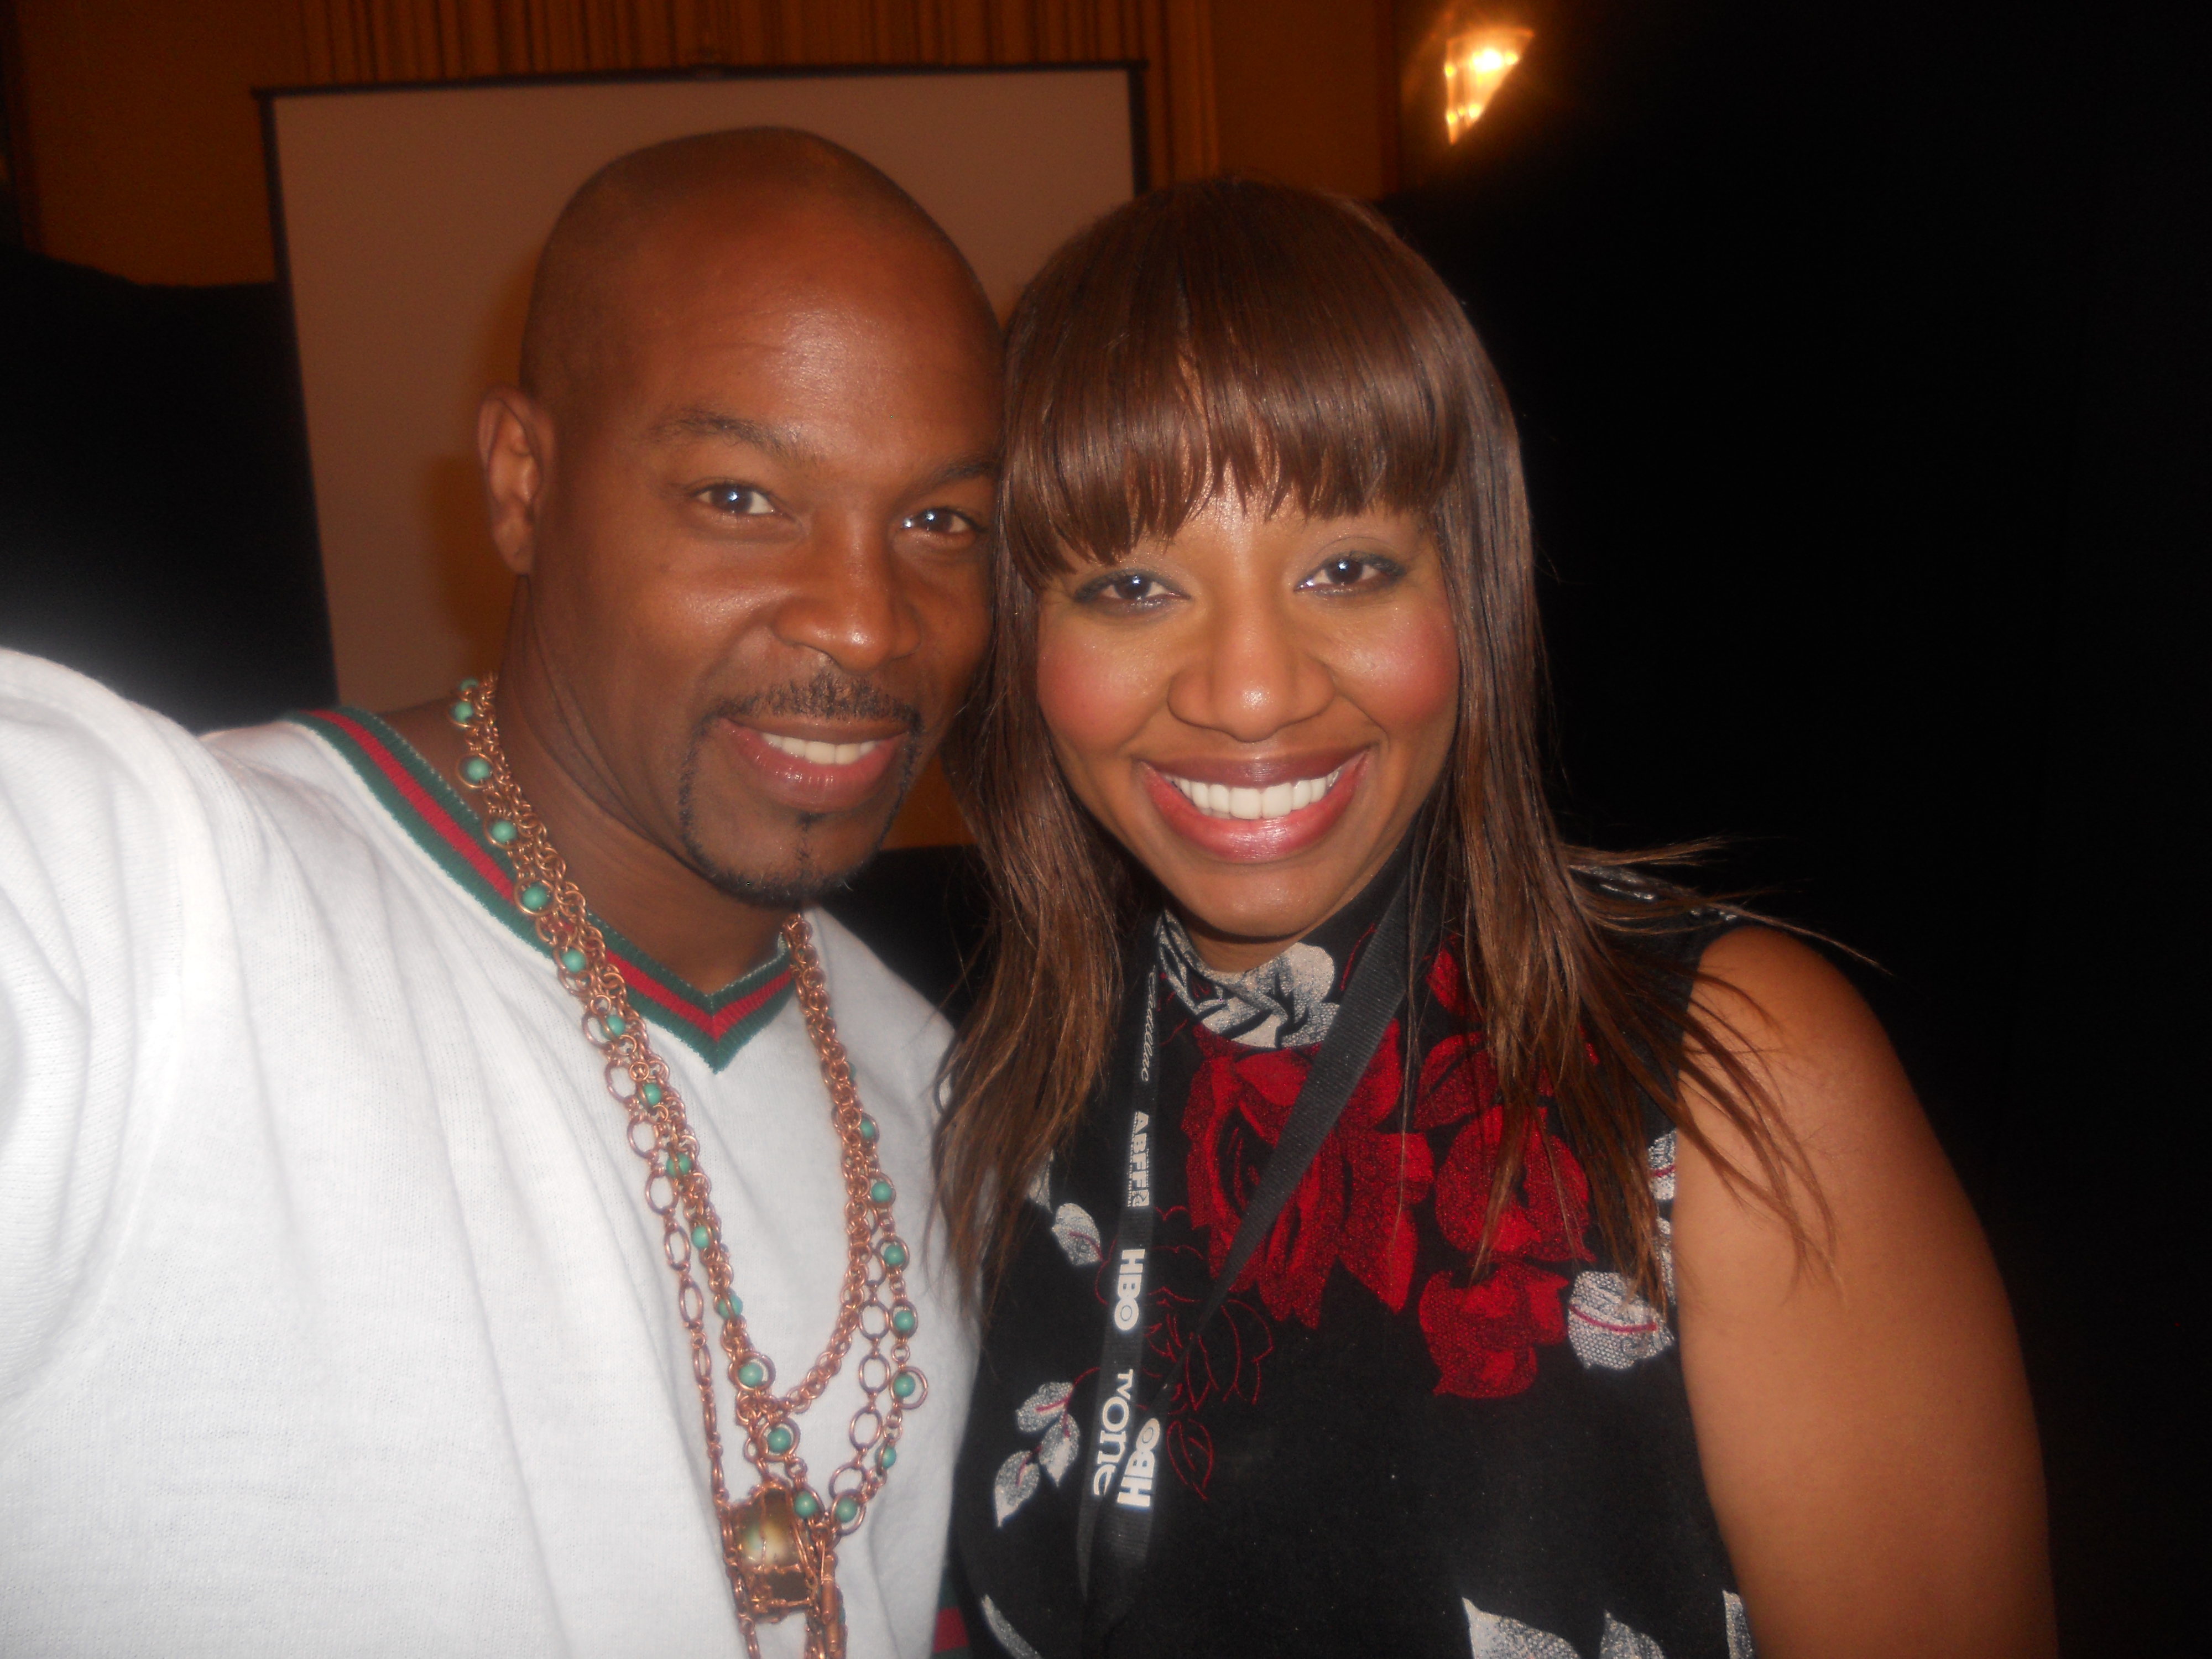 Nicole takes photo with actor-choreographer Darrin Dewitt-Henson at American Black Film Festival in NYC